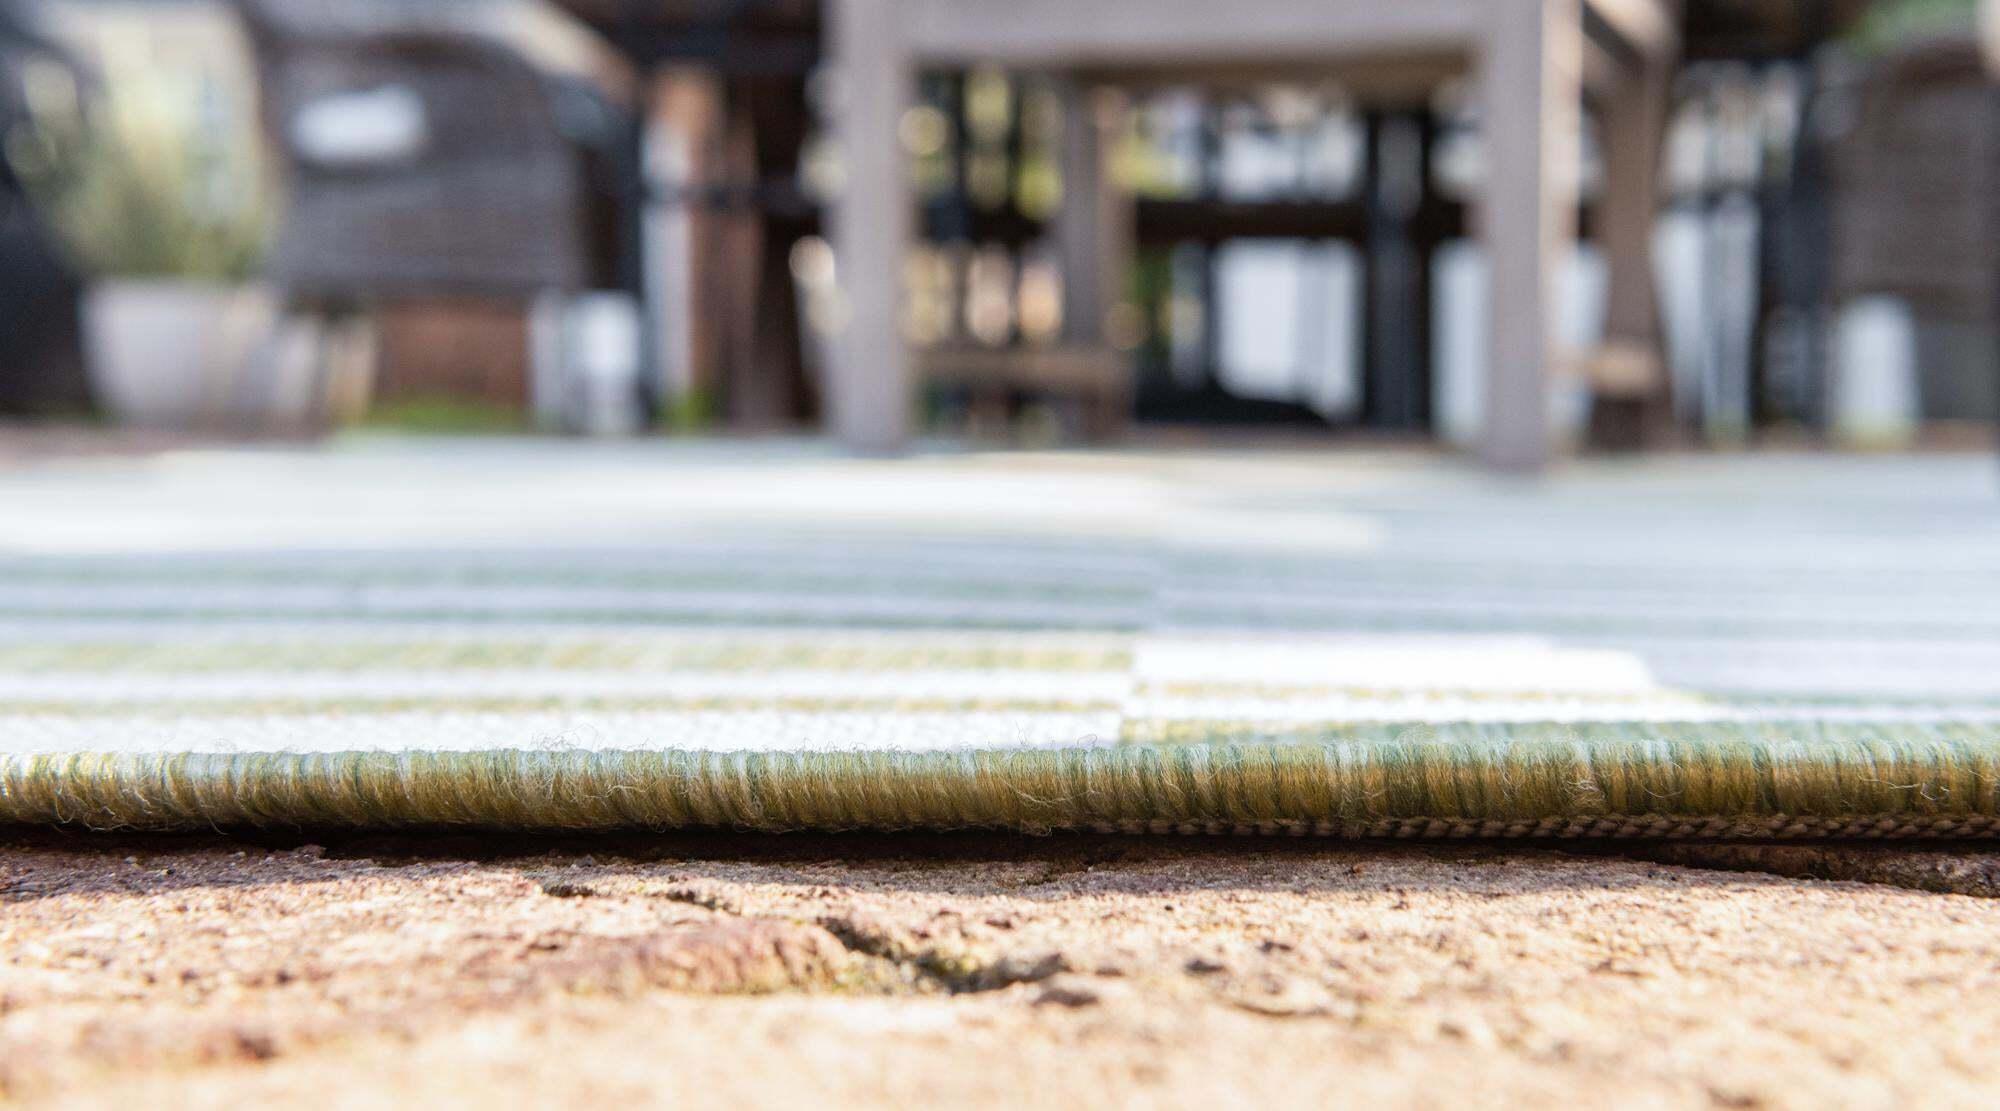 Unique Loom Outdoor Rugs - Outdoor Striped Geometric Rectangular 9x12 Rug Green & Ivory